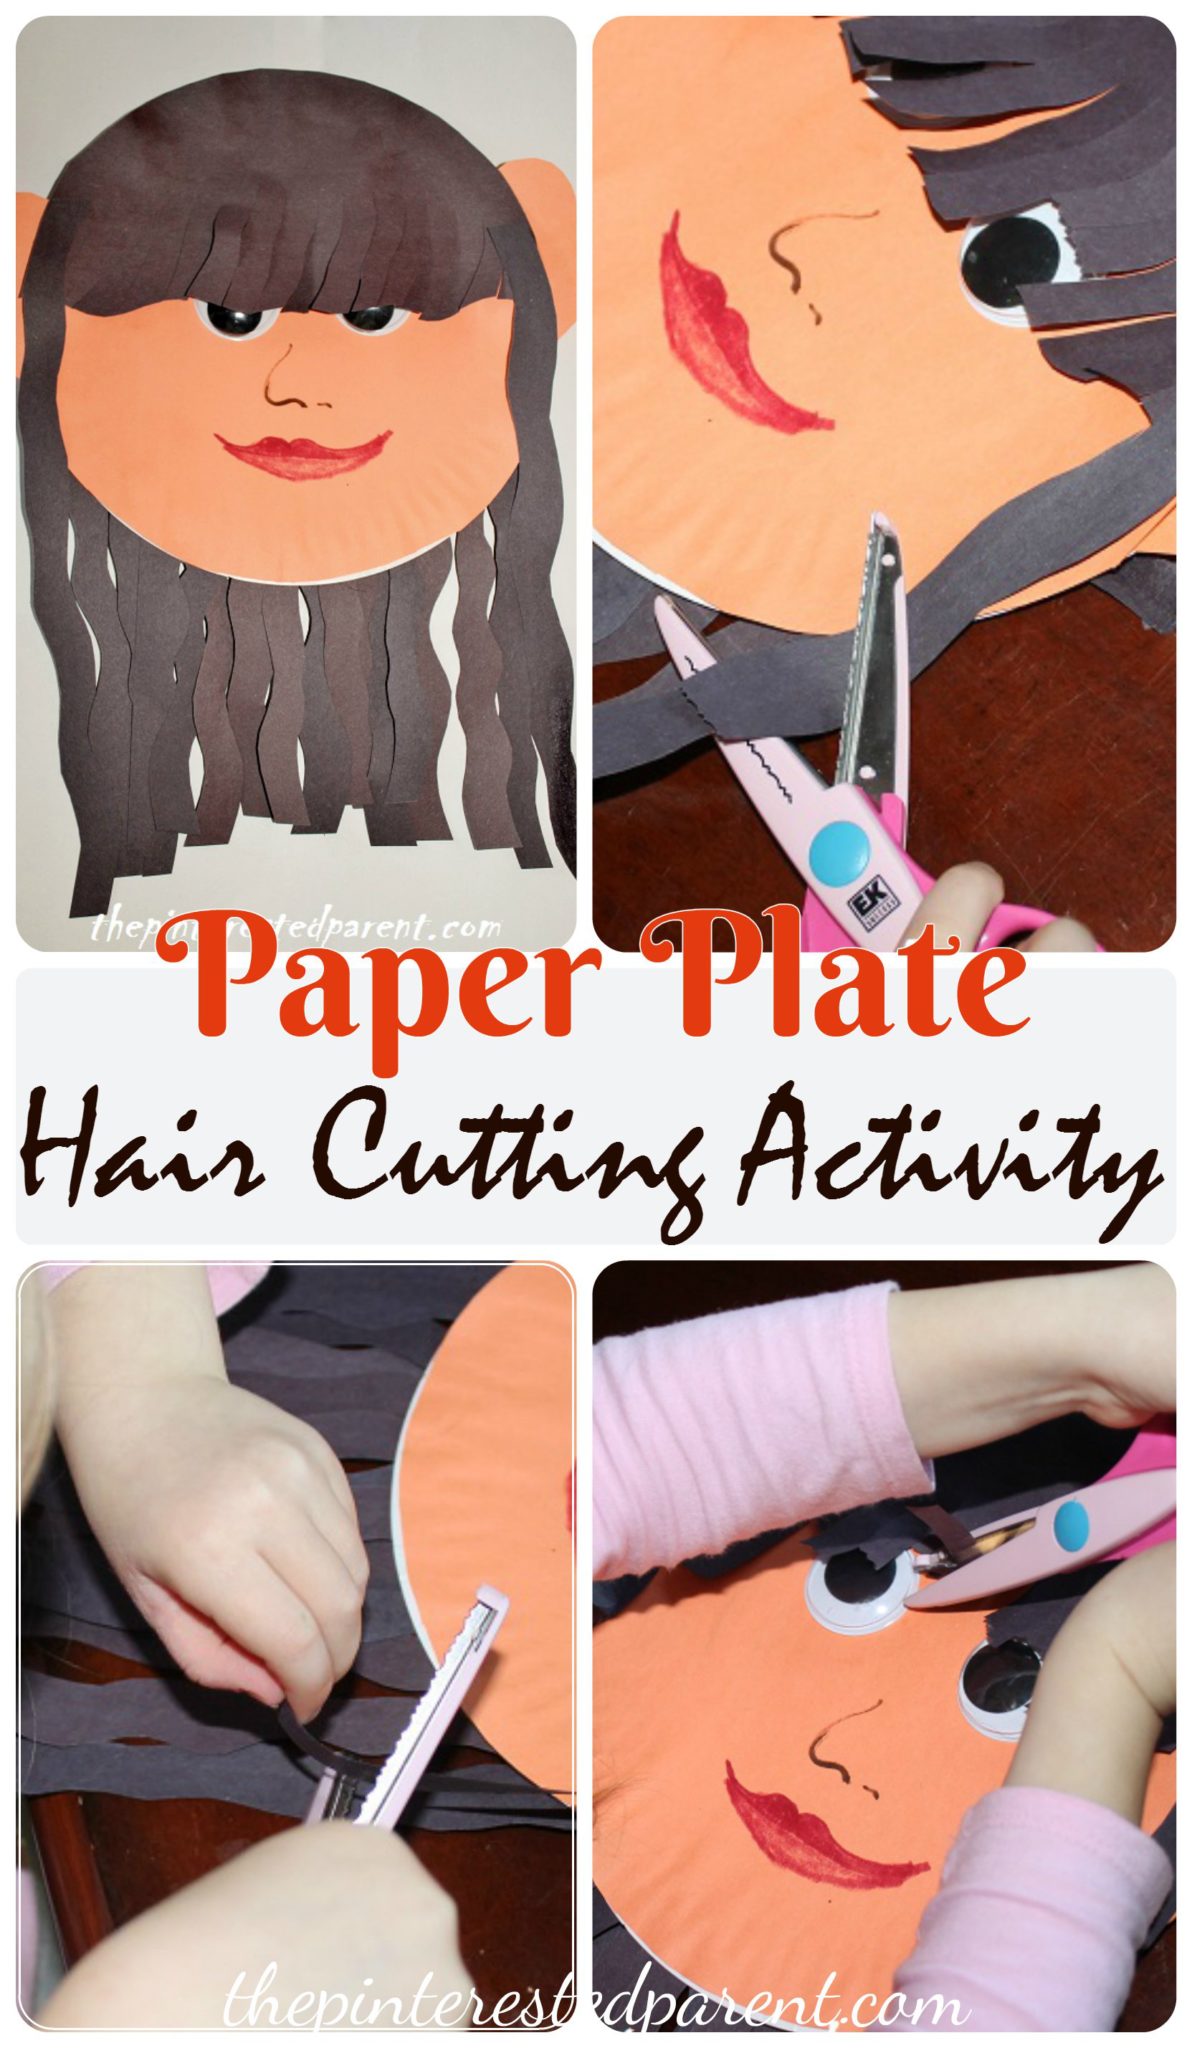 Paper Plate hair cutting activity & craft - this activity is a great fine motor skill activity. My daughter had so much fun with this.